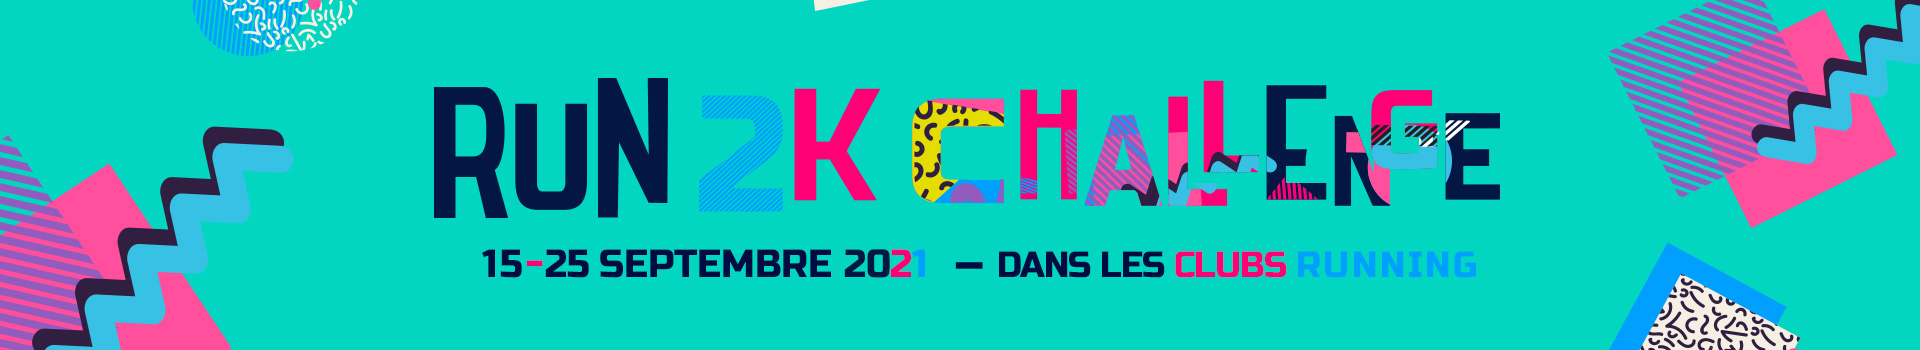 Run 2K Challenge : second round pour les runneuses et runners!